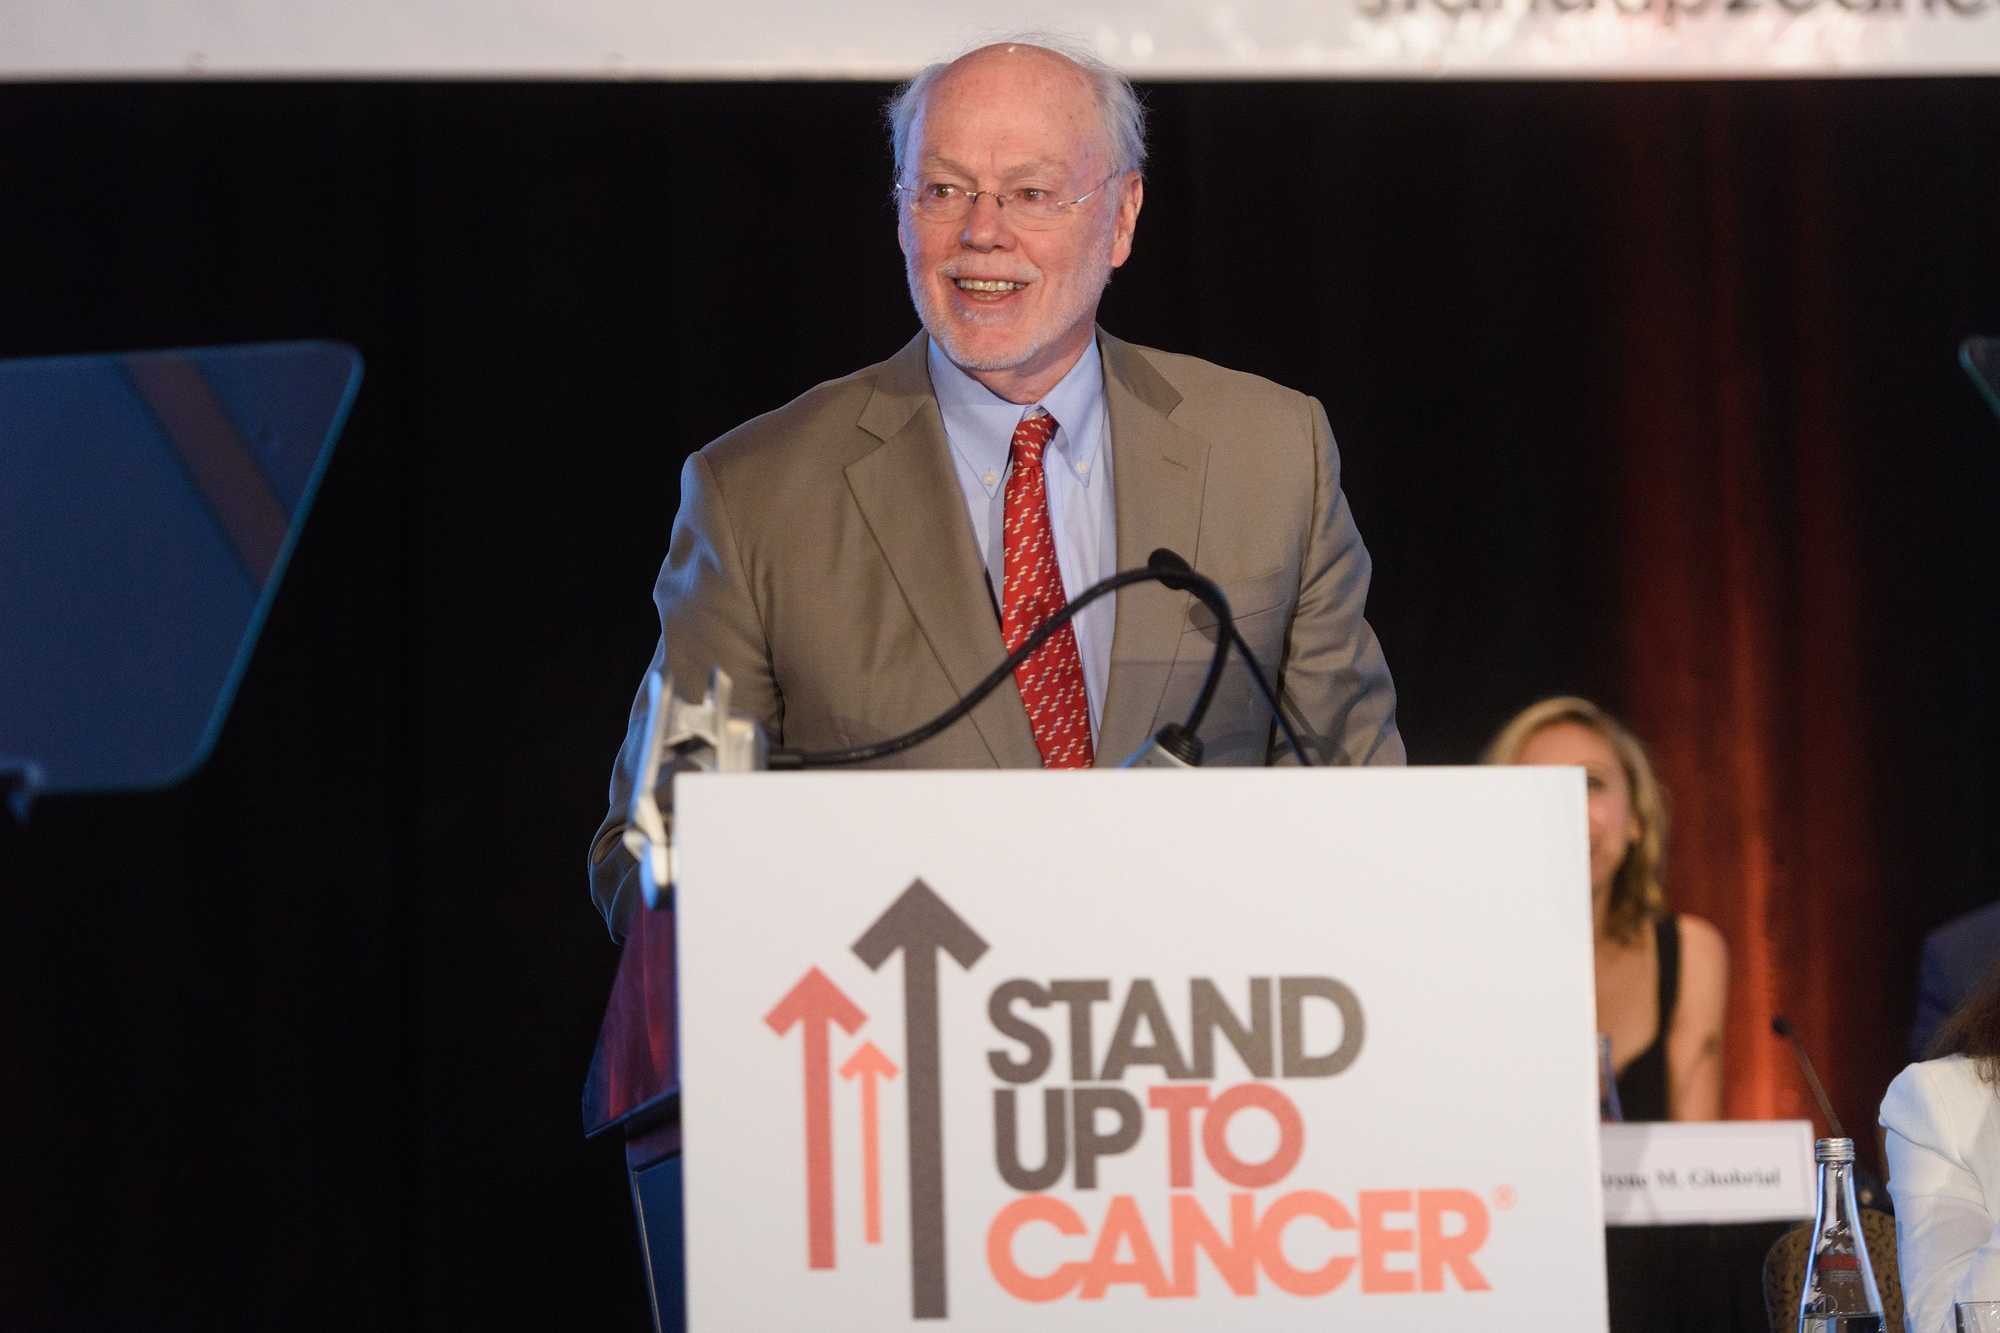 Phillip Sharp, an MIT biology professor and Nobel Prize winner, at a cancer research event in 2018. 

